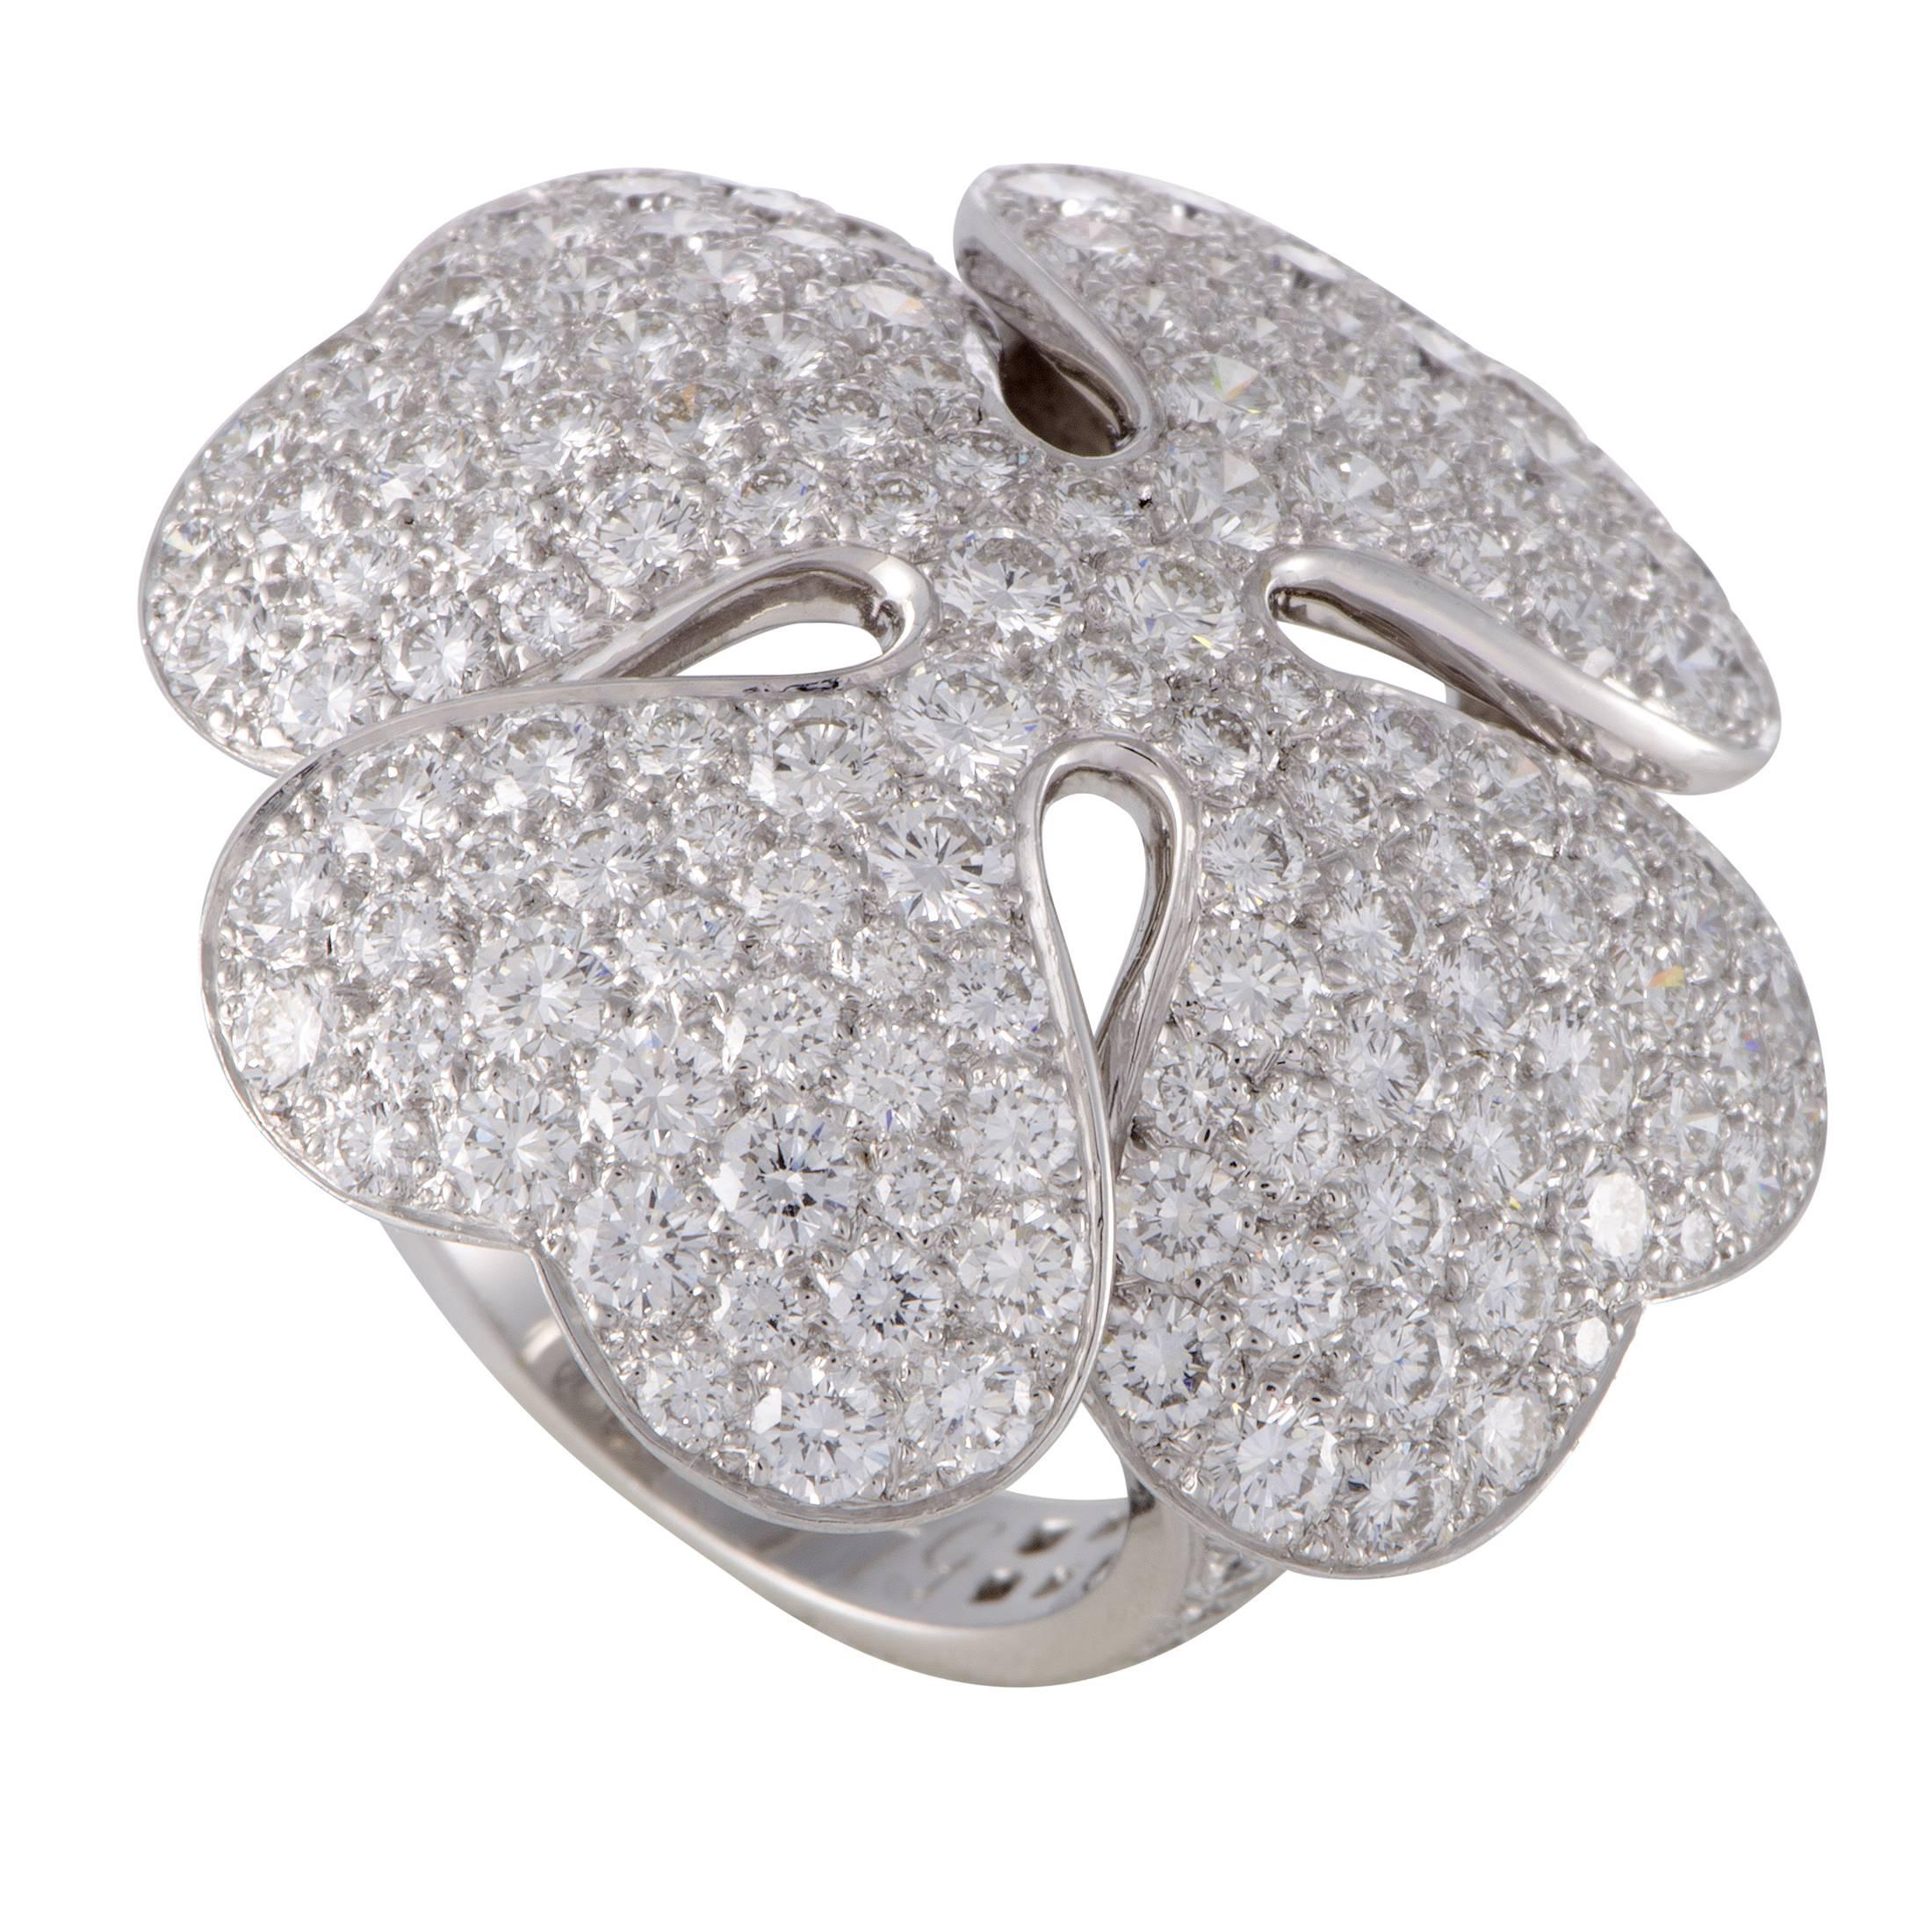 Cartier Anniversary Edition Full Diamond Pave White Gold Clover Cocktail Ring